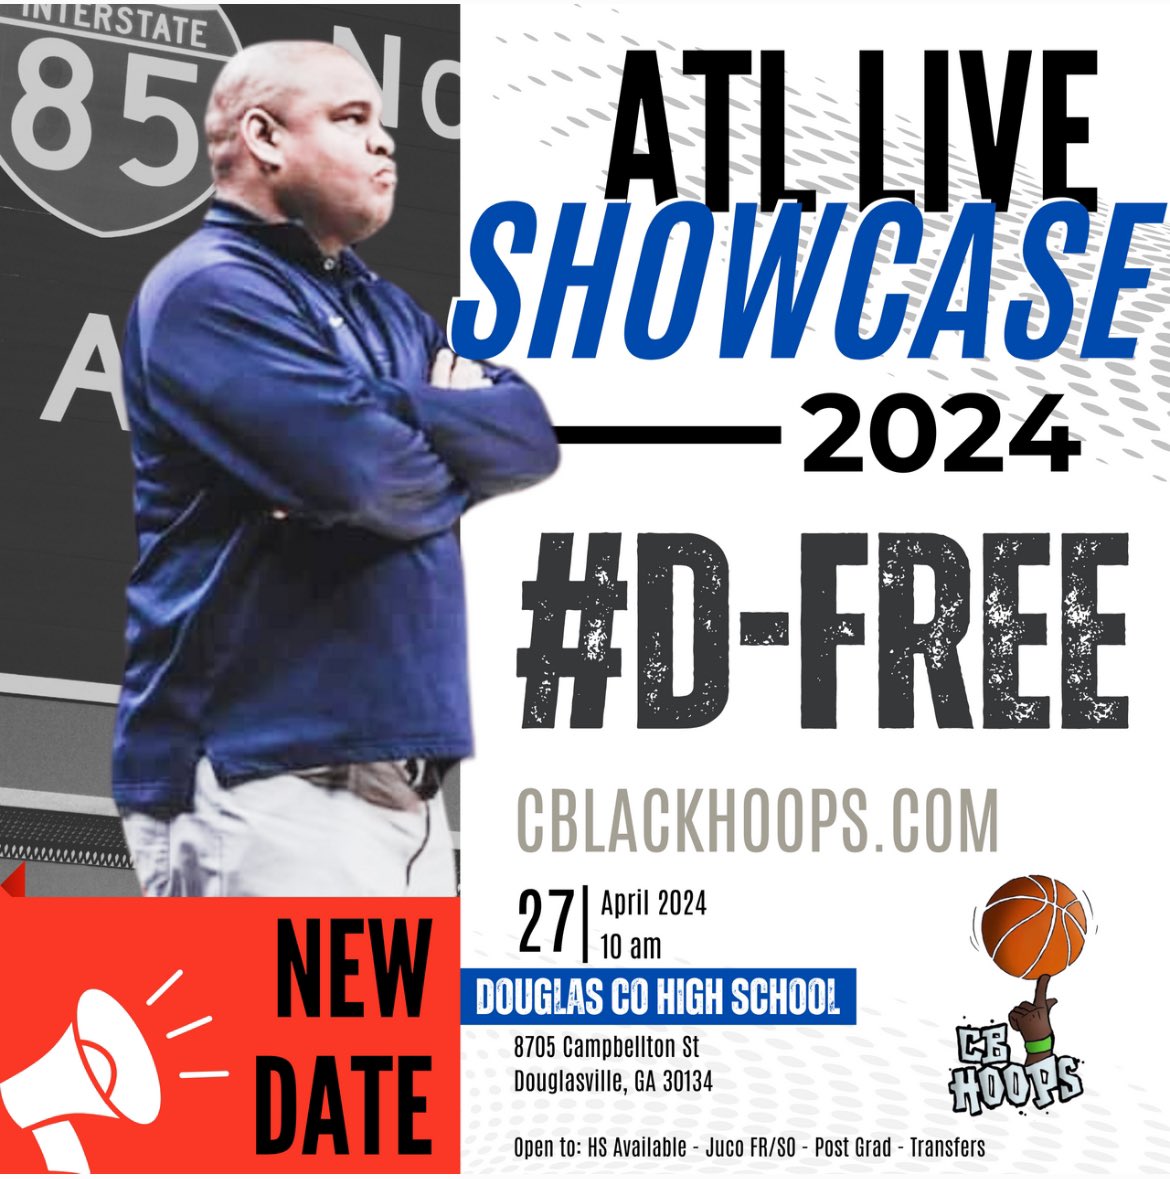 NEW DATE for ATL LIVE ‼️‼️‼️‼️‼️ Info/Register: jucoreport.wufoo.com/forms/zzn7g2y1…